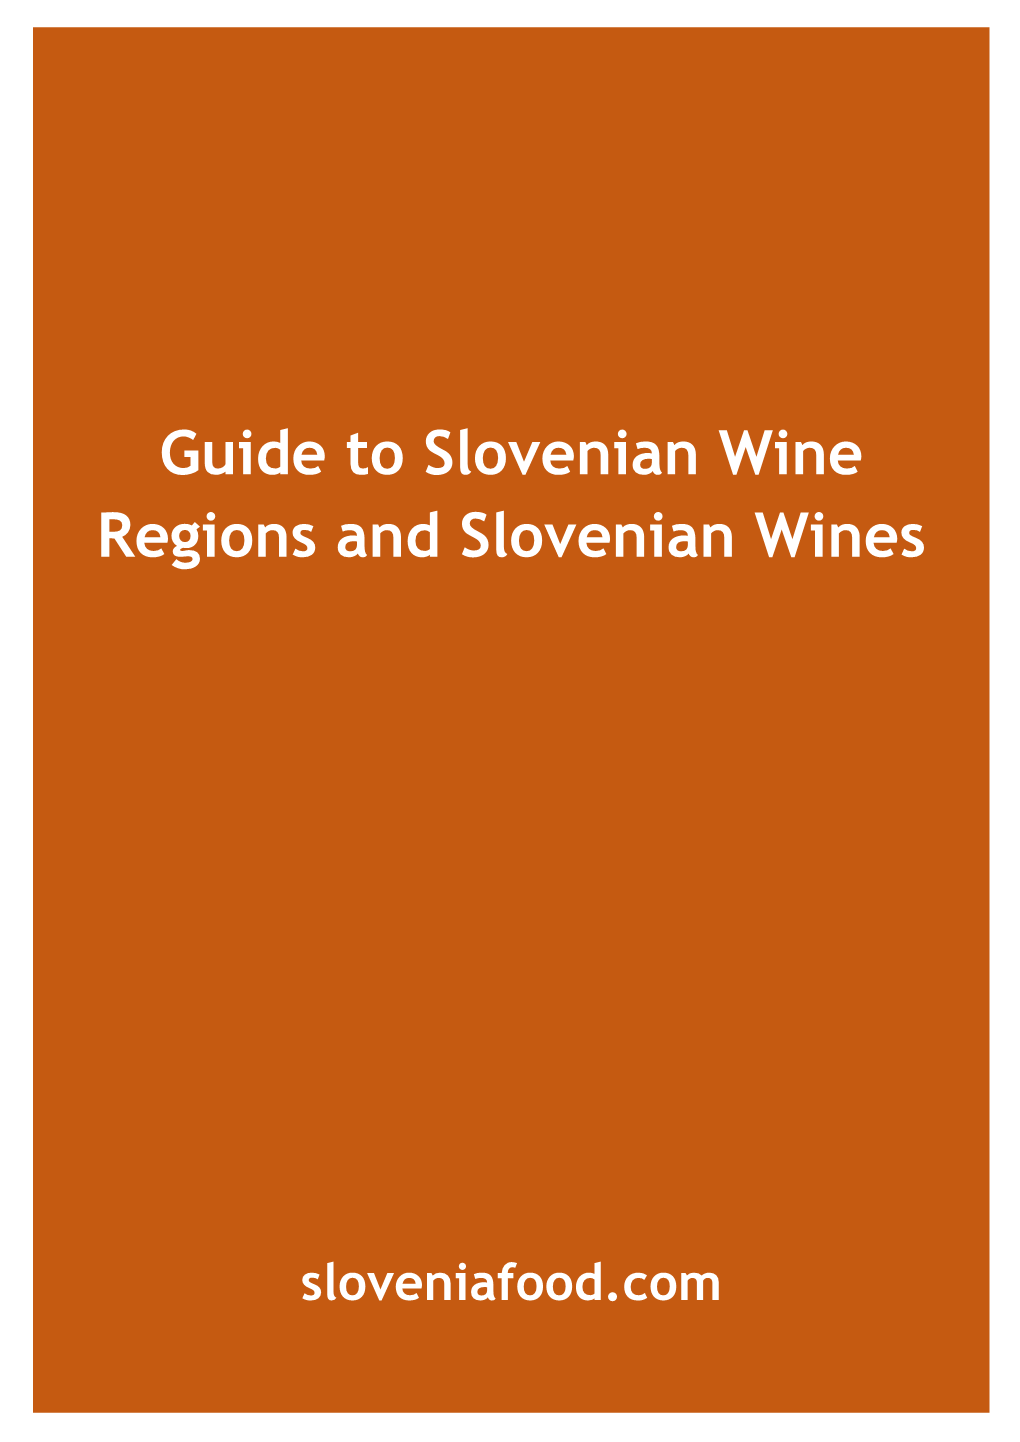 Guide to Slovenian Wine Regions and Slovenian Wines